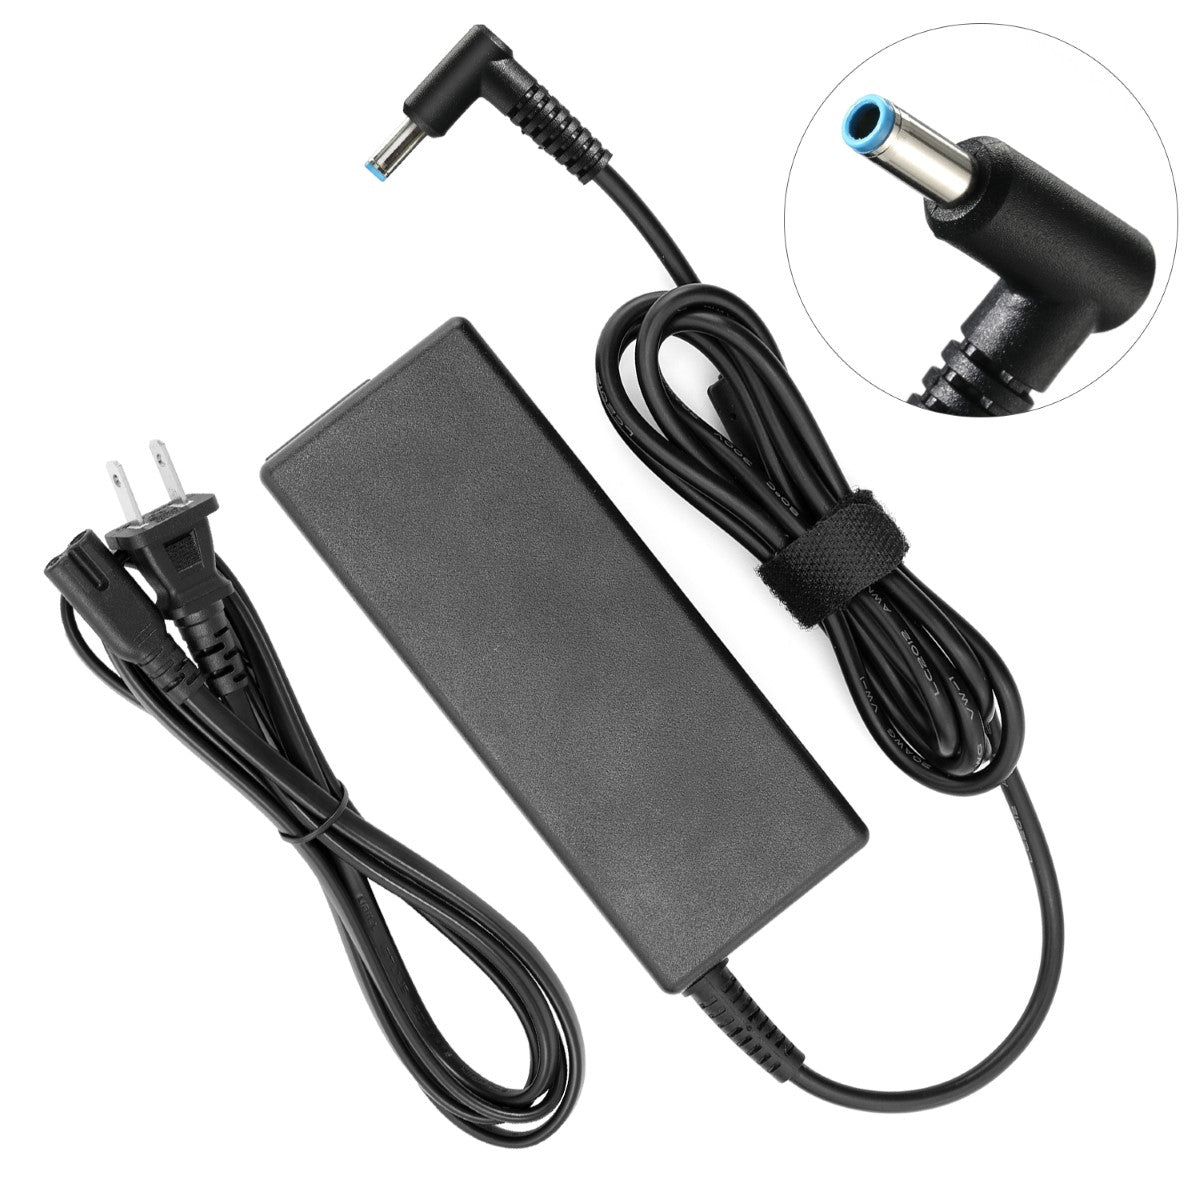 AC Adapter Charger for hp Pavilion 15-p030us Notebook.